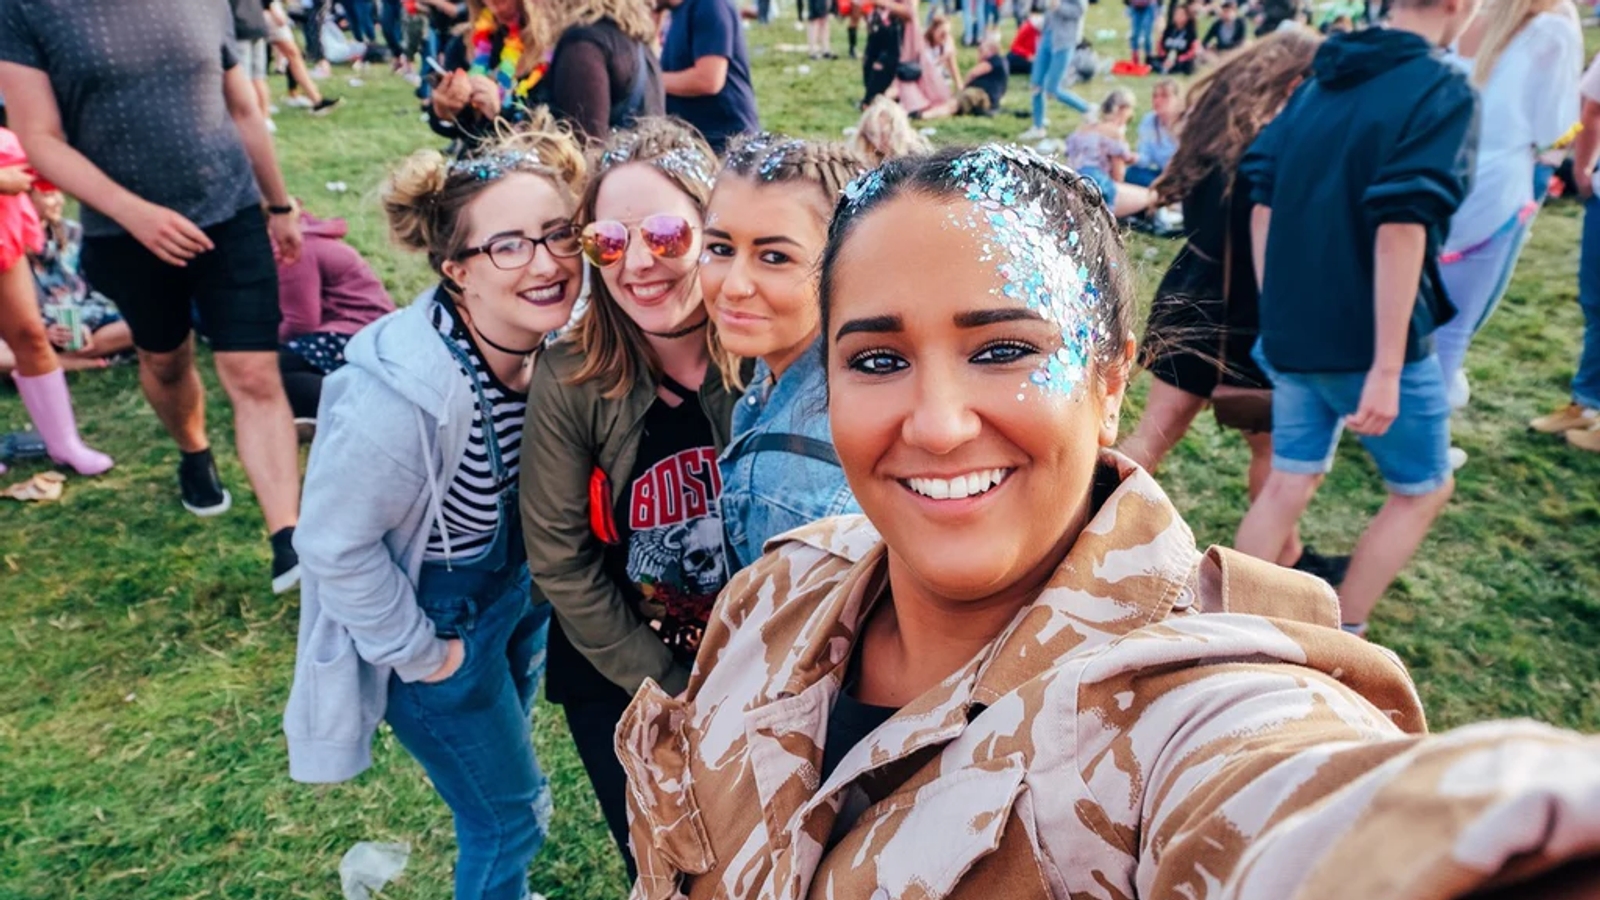 A group of friends at a festival with glitter on their faces